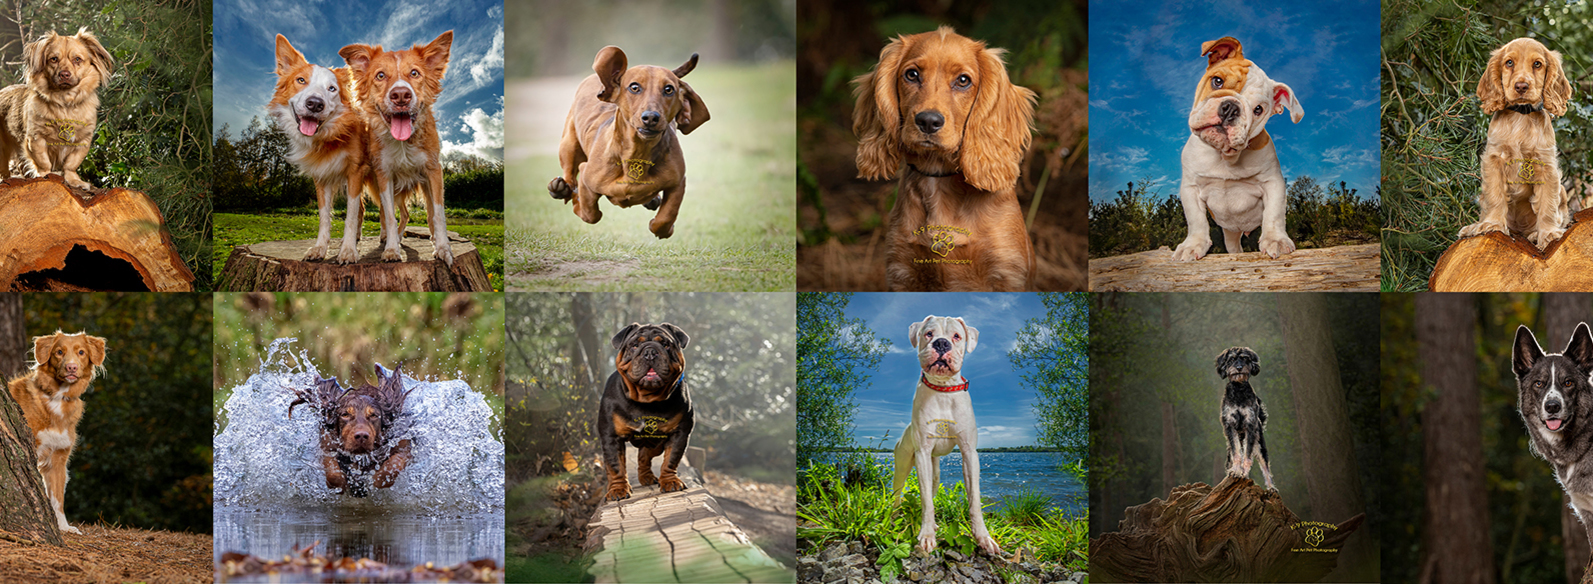 dog portrait photography based in the UK but travels the World